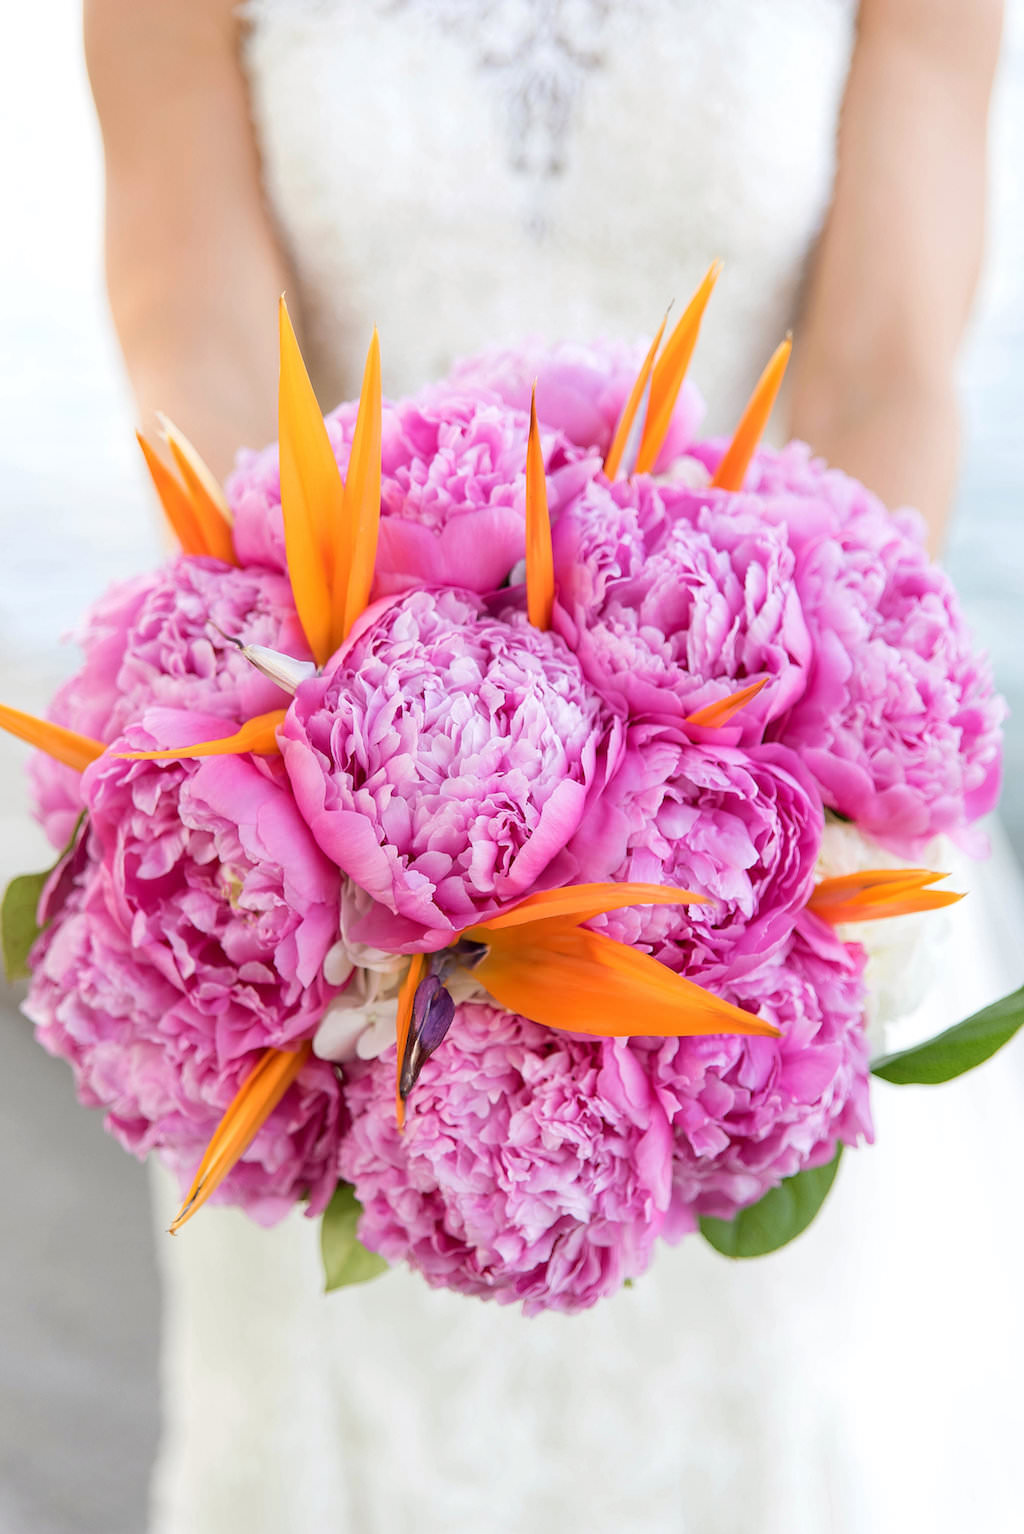 Tropical Wedding Bouquet with Pink Peonies and Orange Bird of Paradise Flowers and Greenery